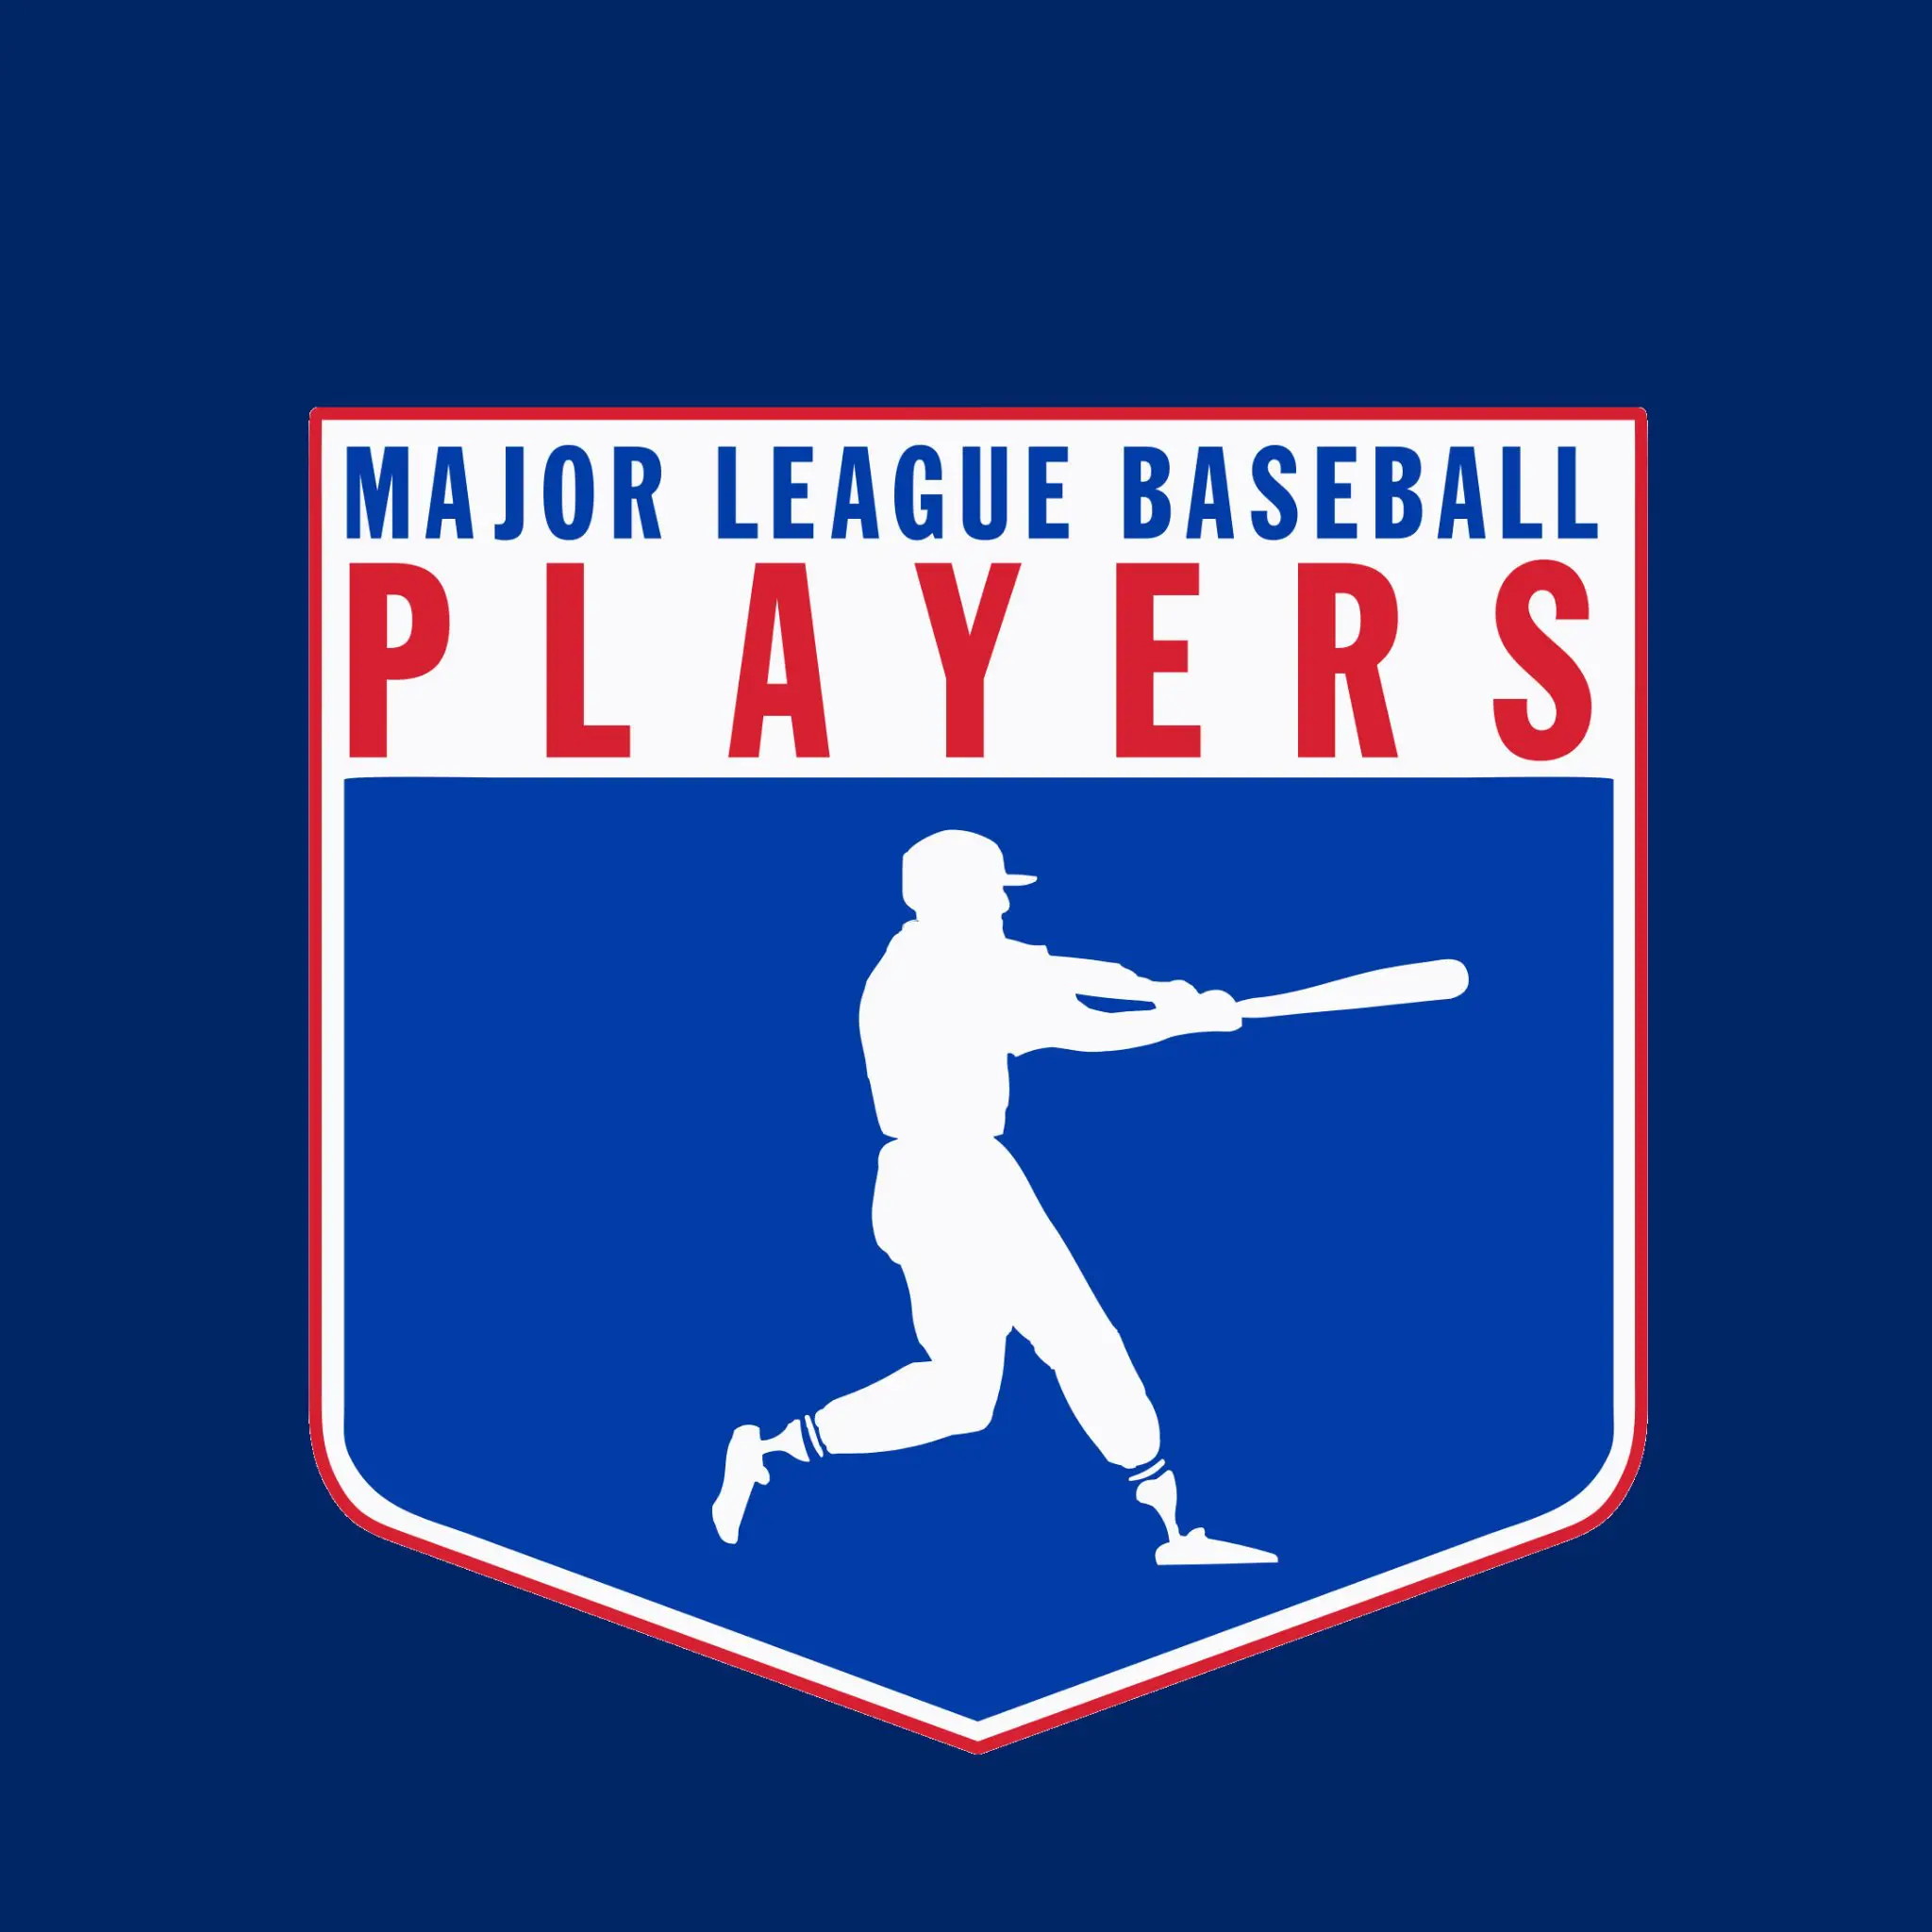 Shocker! – Players Union Will Reportedly Reject MLB’s Latest Proposal